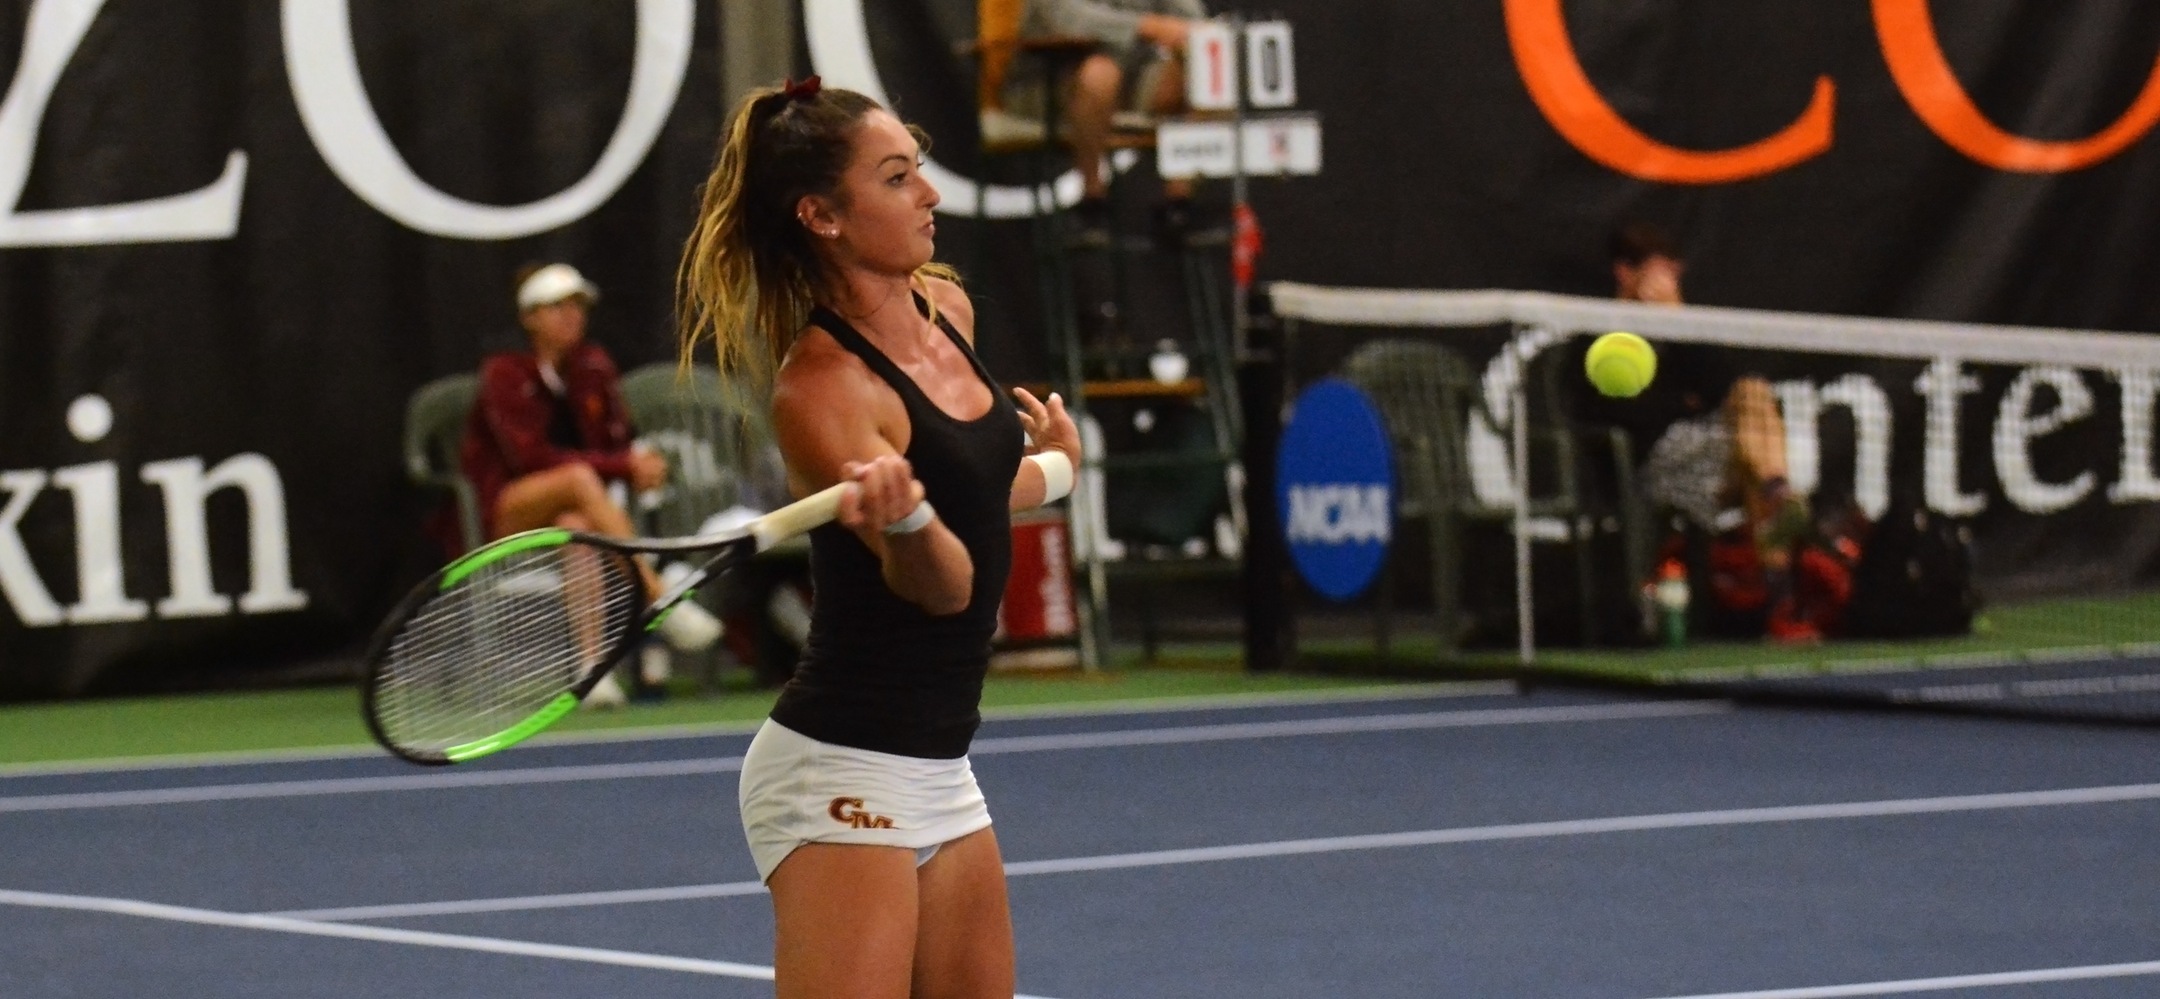 Allen Reaches NCAA Quarterfinals in Singles and Doubles, Both Women's Tennis Doubles Teams Advance